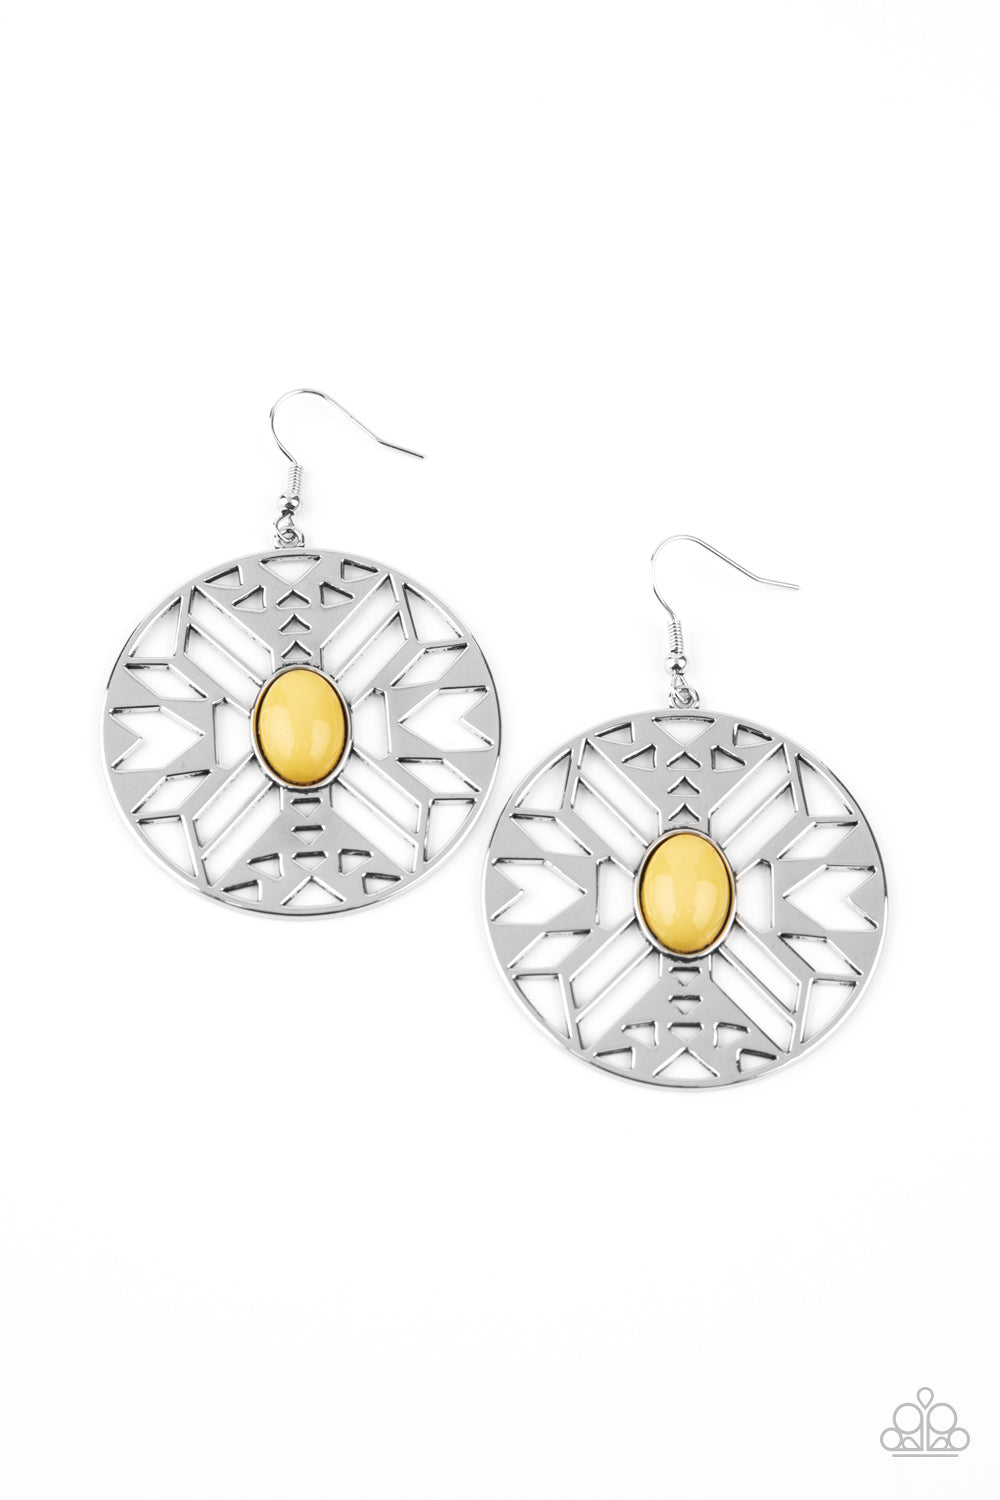 SOUTHWEST WALKABOUT - Paparazzi - An oval yellow bead adorns the center of a round silver frame radiating with an airy southwestern inspired pattern for a whimsical look. Earring attaches to a standard fishhook fitting.  Sold as one pair of earrings.